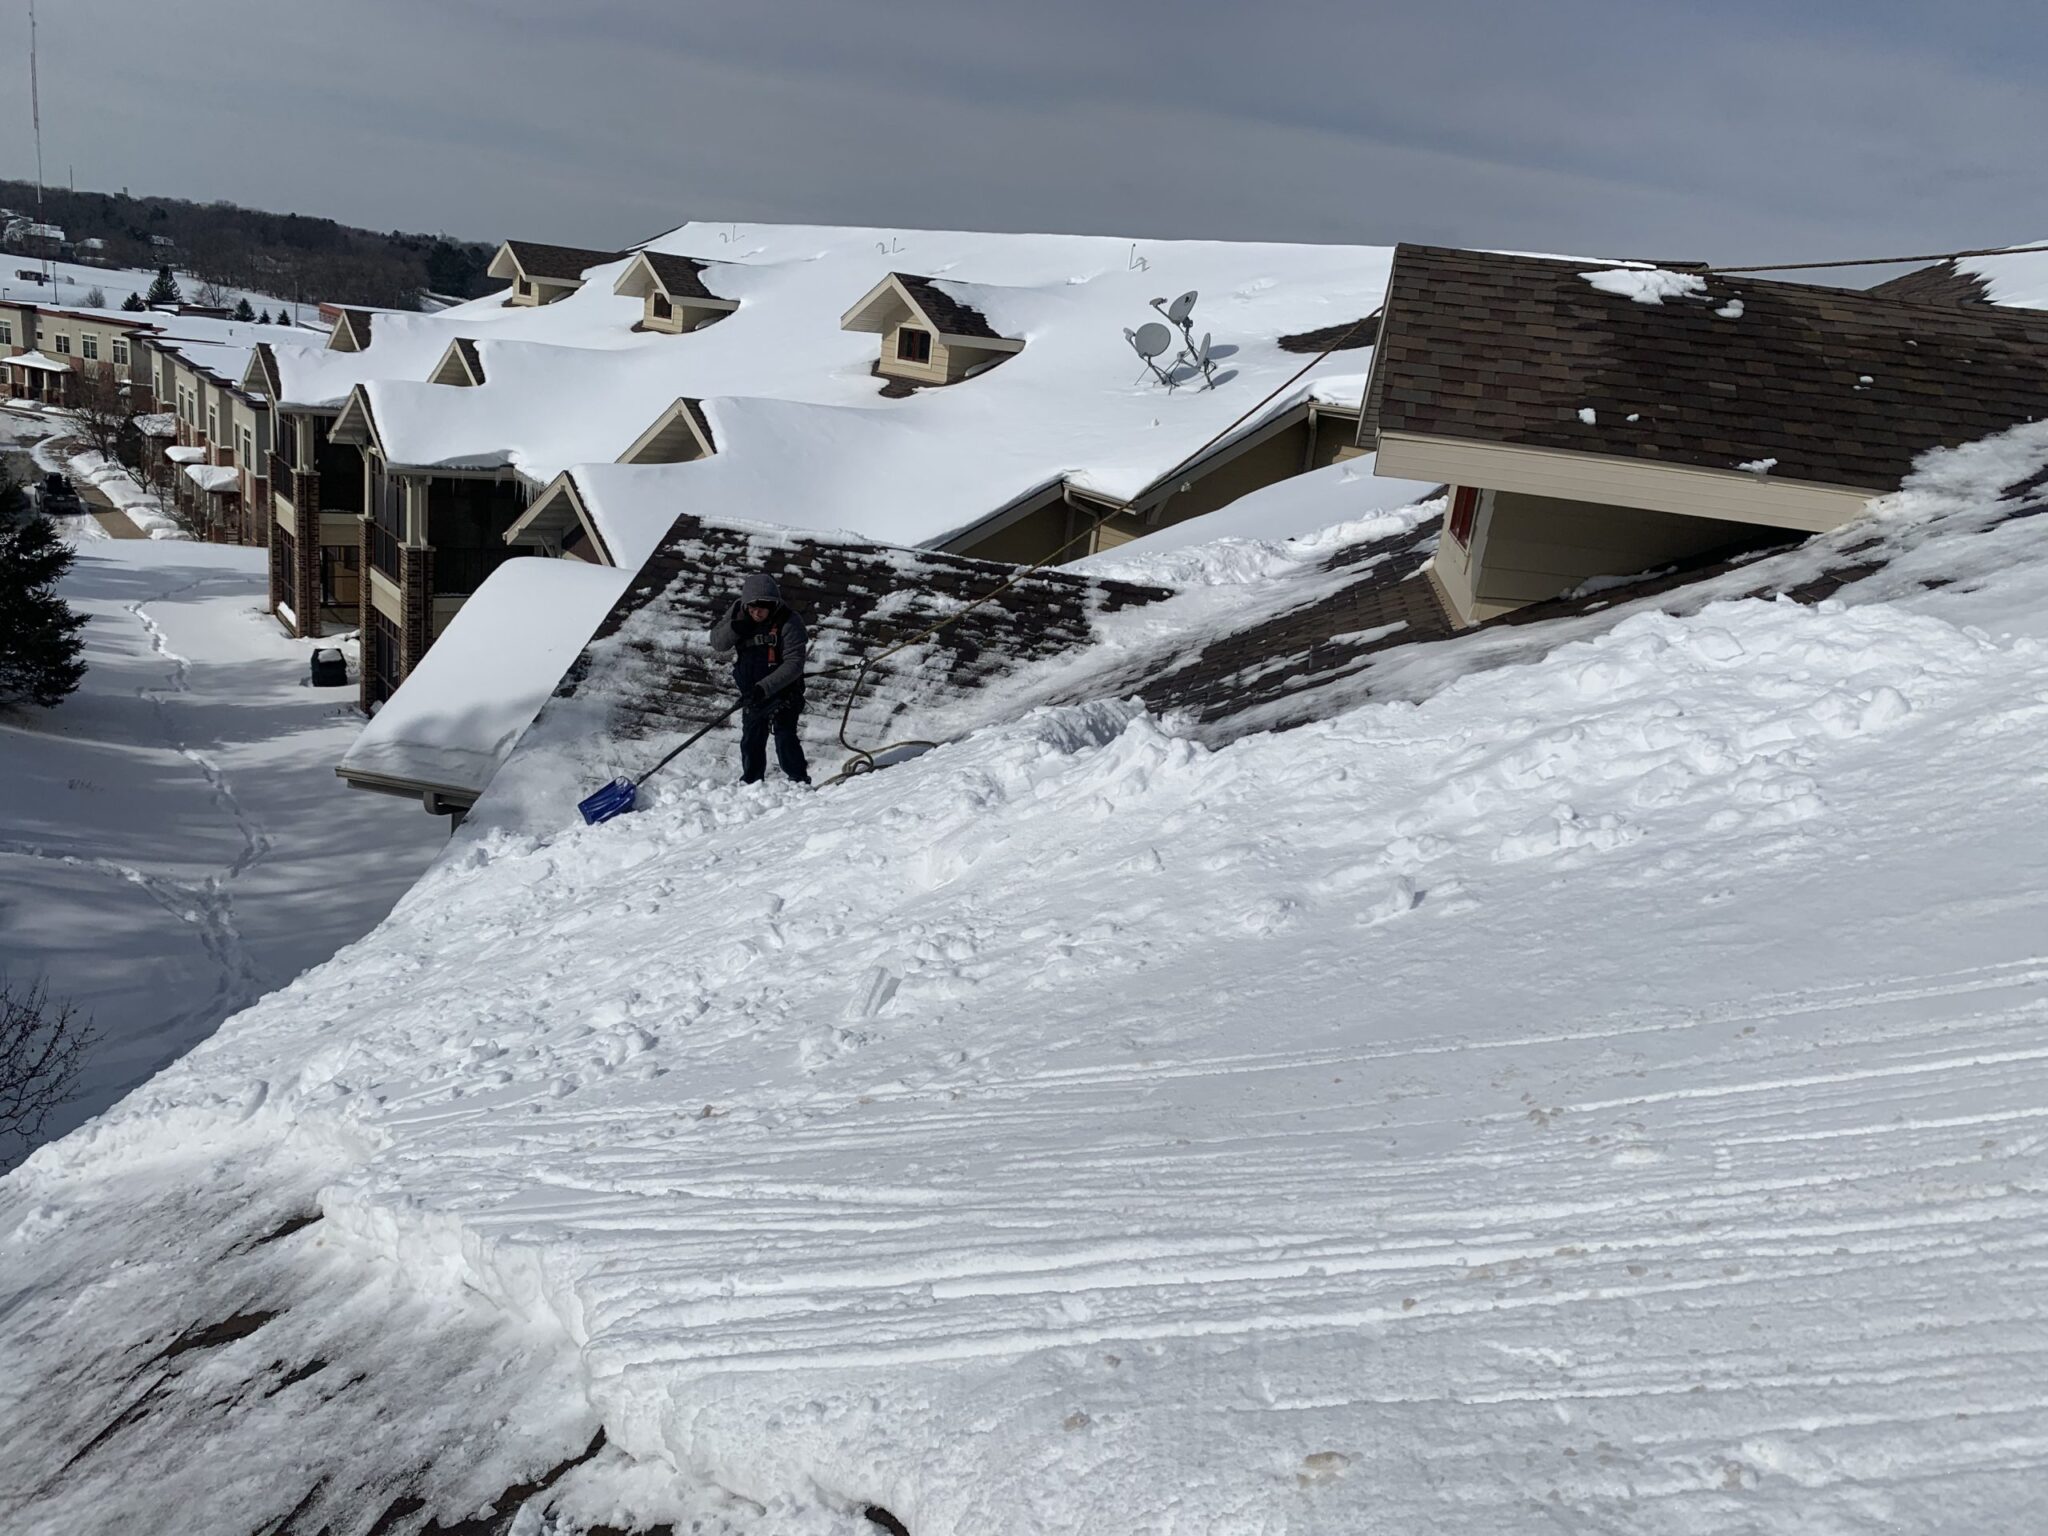 Worker shoveling snow from a home's roof